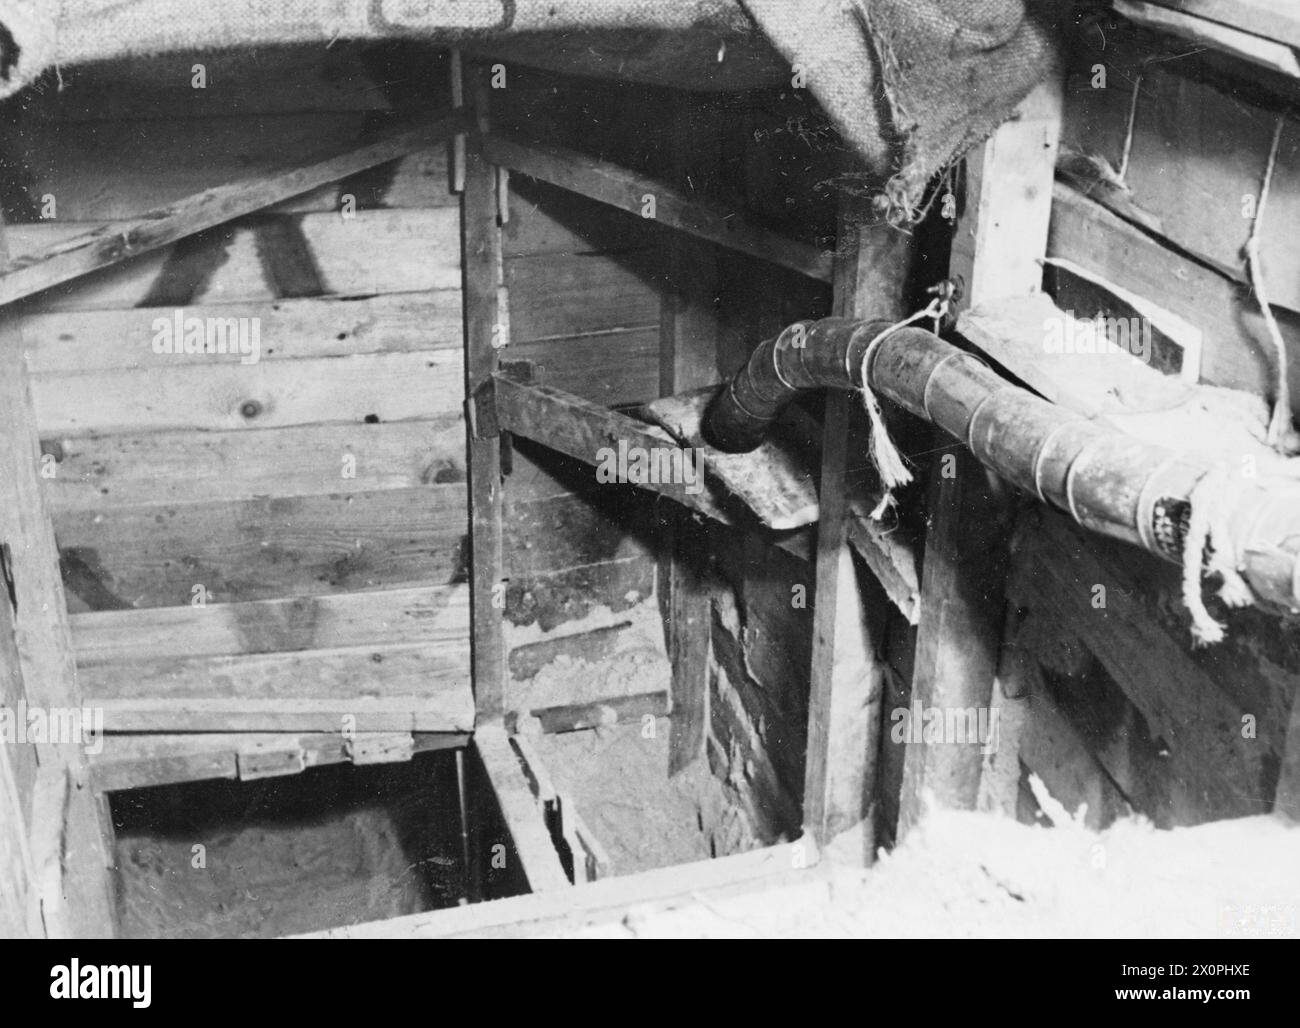 THE GREAT ESCAPE, MARCH 1944 - Entrance to the 'Harry' escape tunnel at Stalag Luft III, Sagan. Photograph probably taken in late March 1944 Royal Air Force Stock Photo